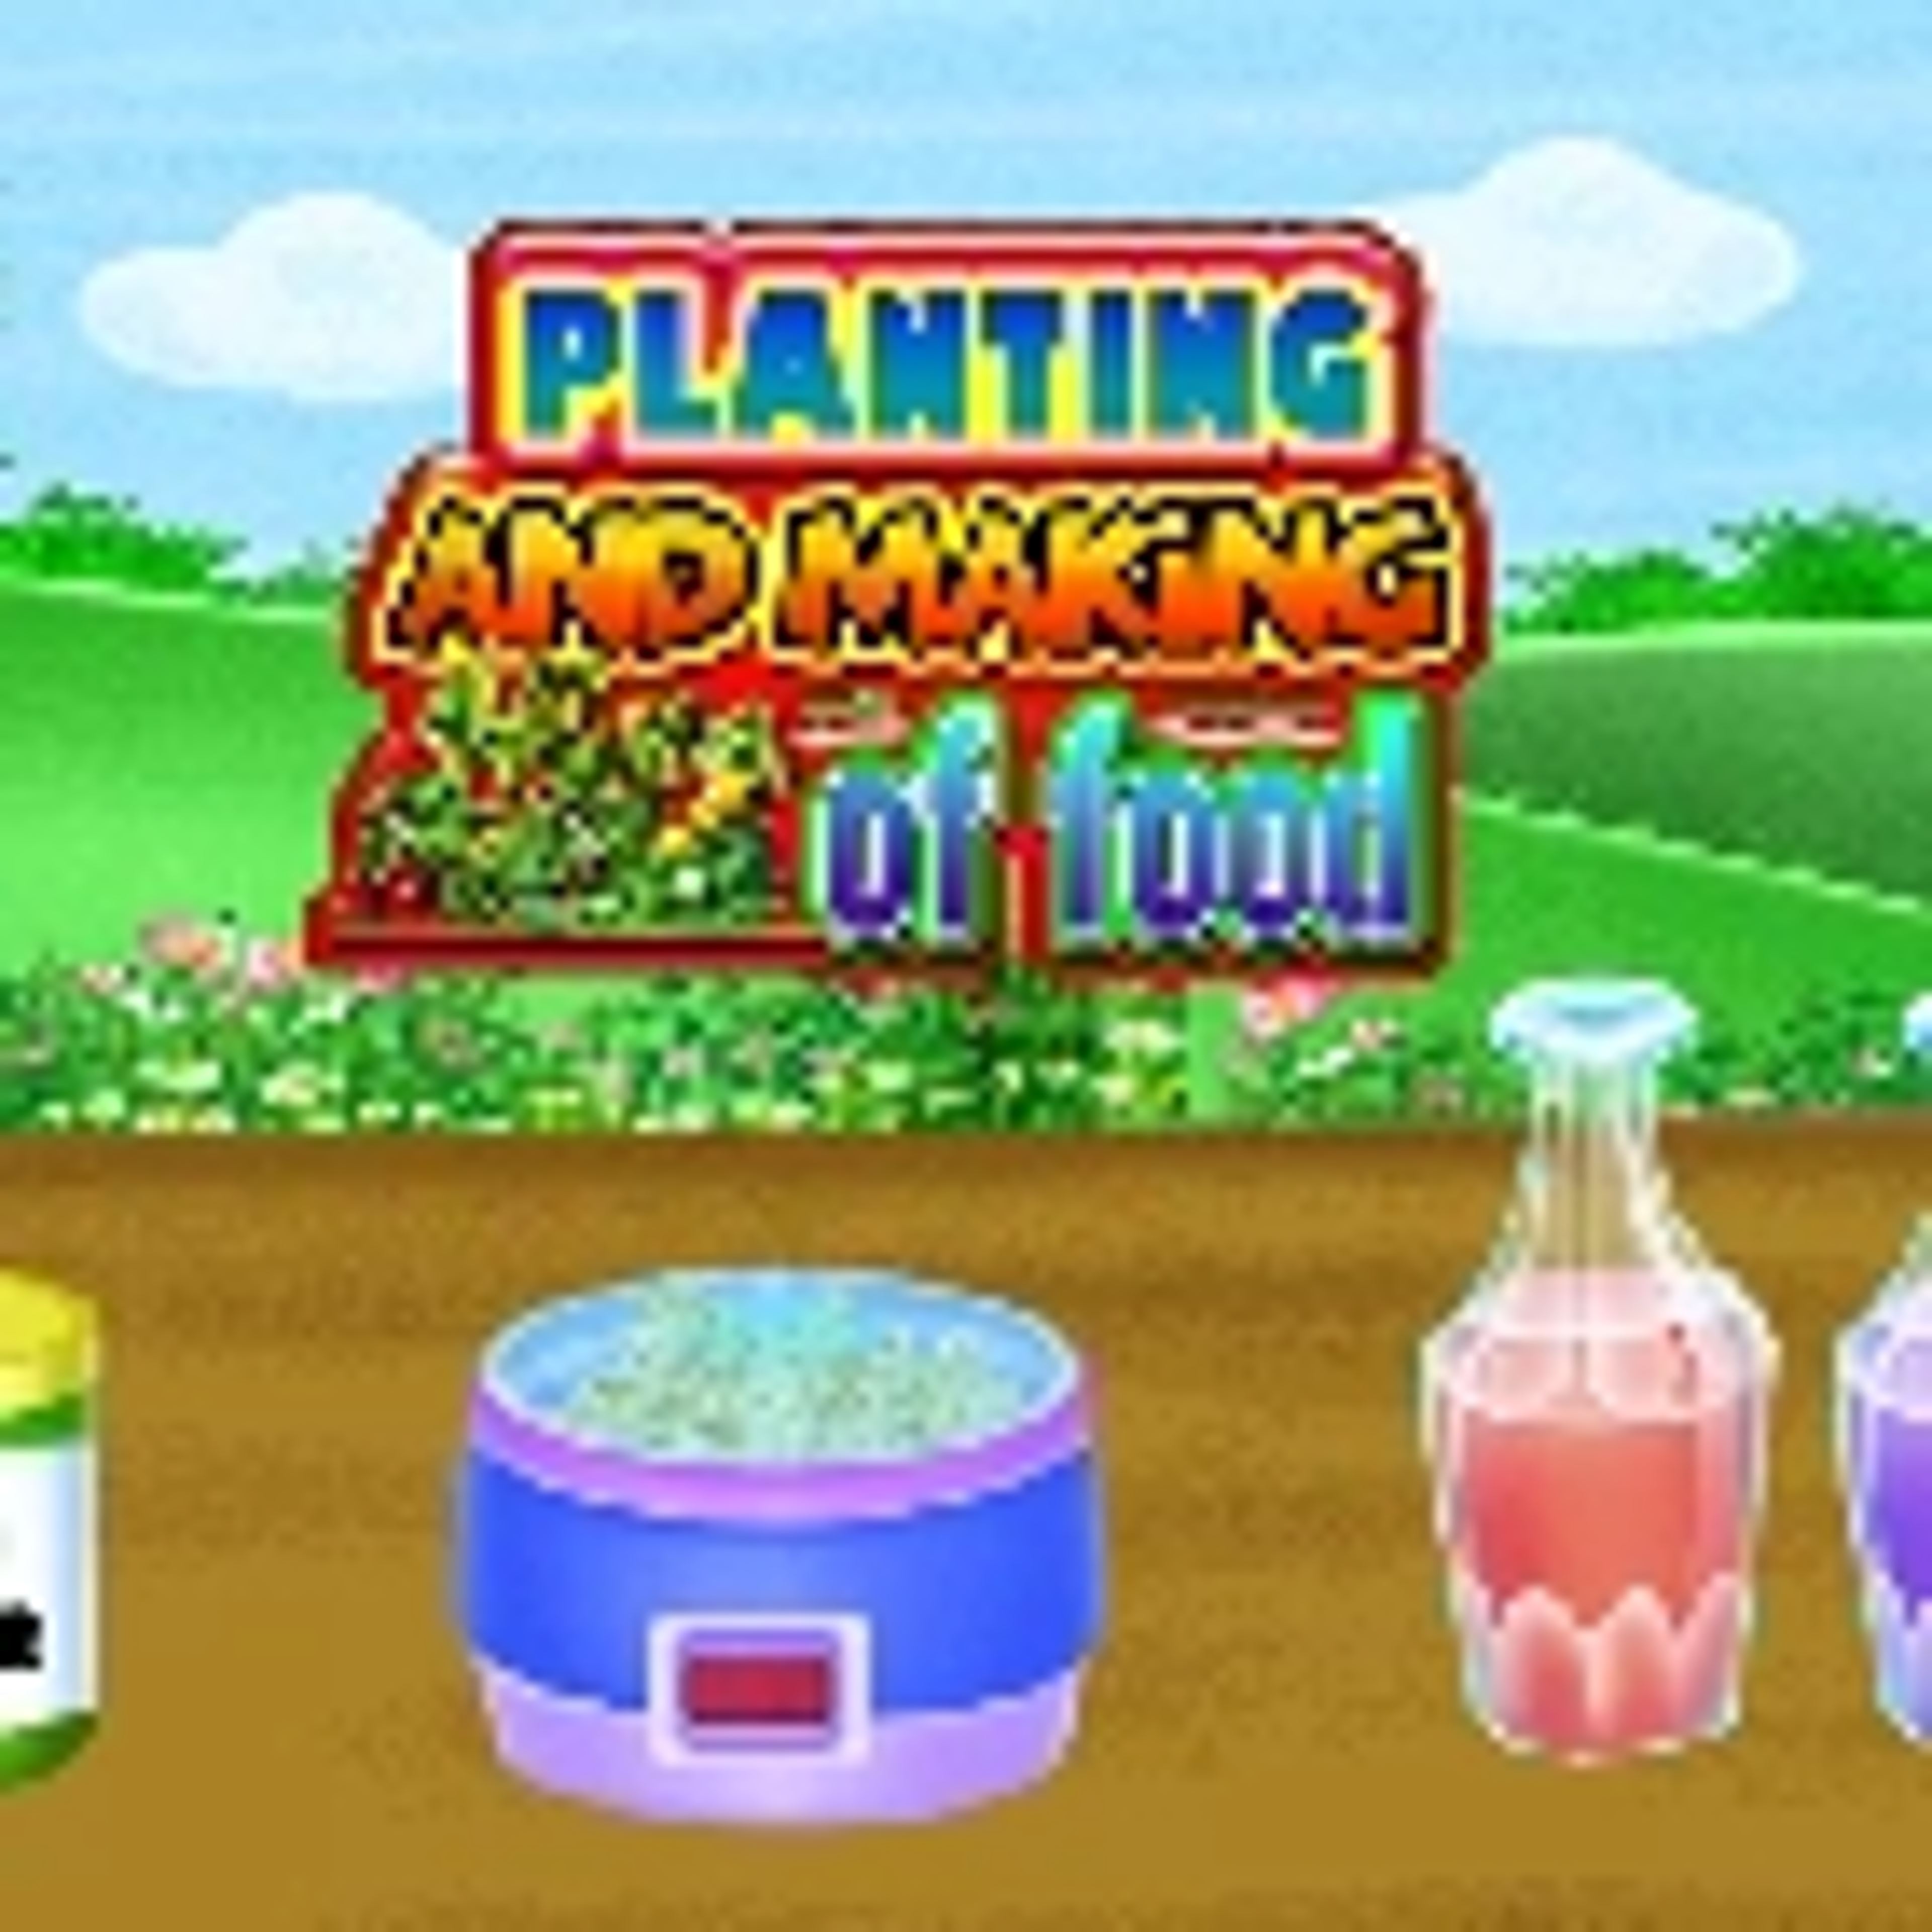 Planting And Making of Food